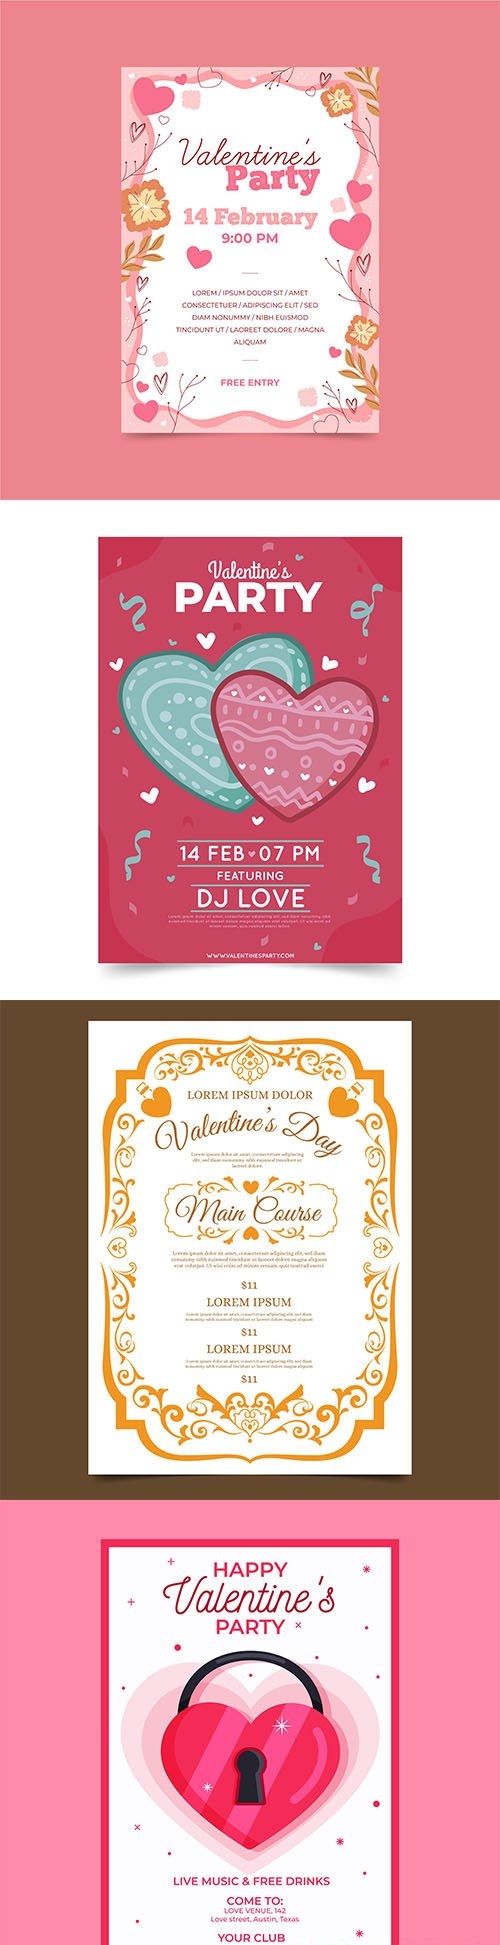 Hand-drawn valentines day party poster template